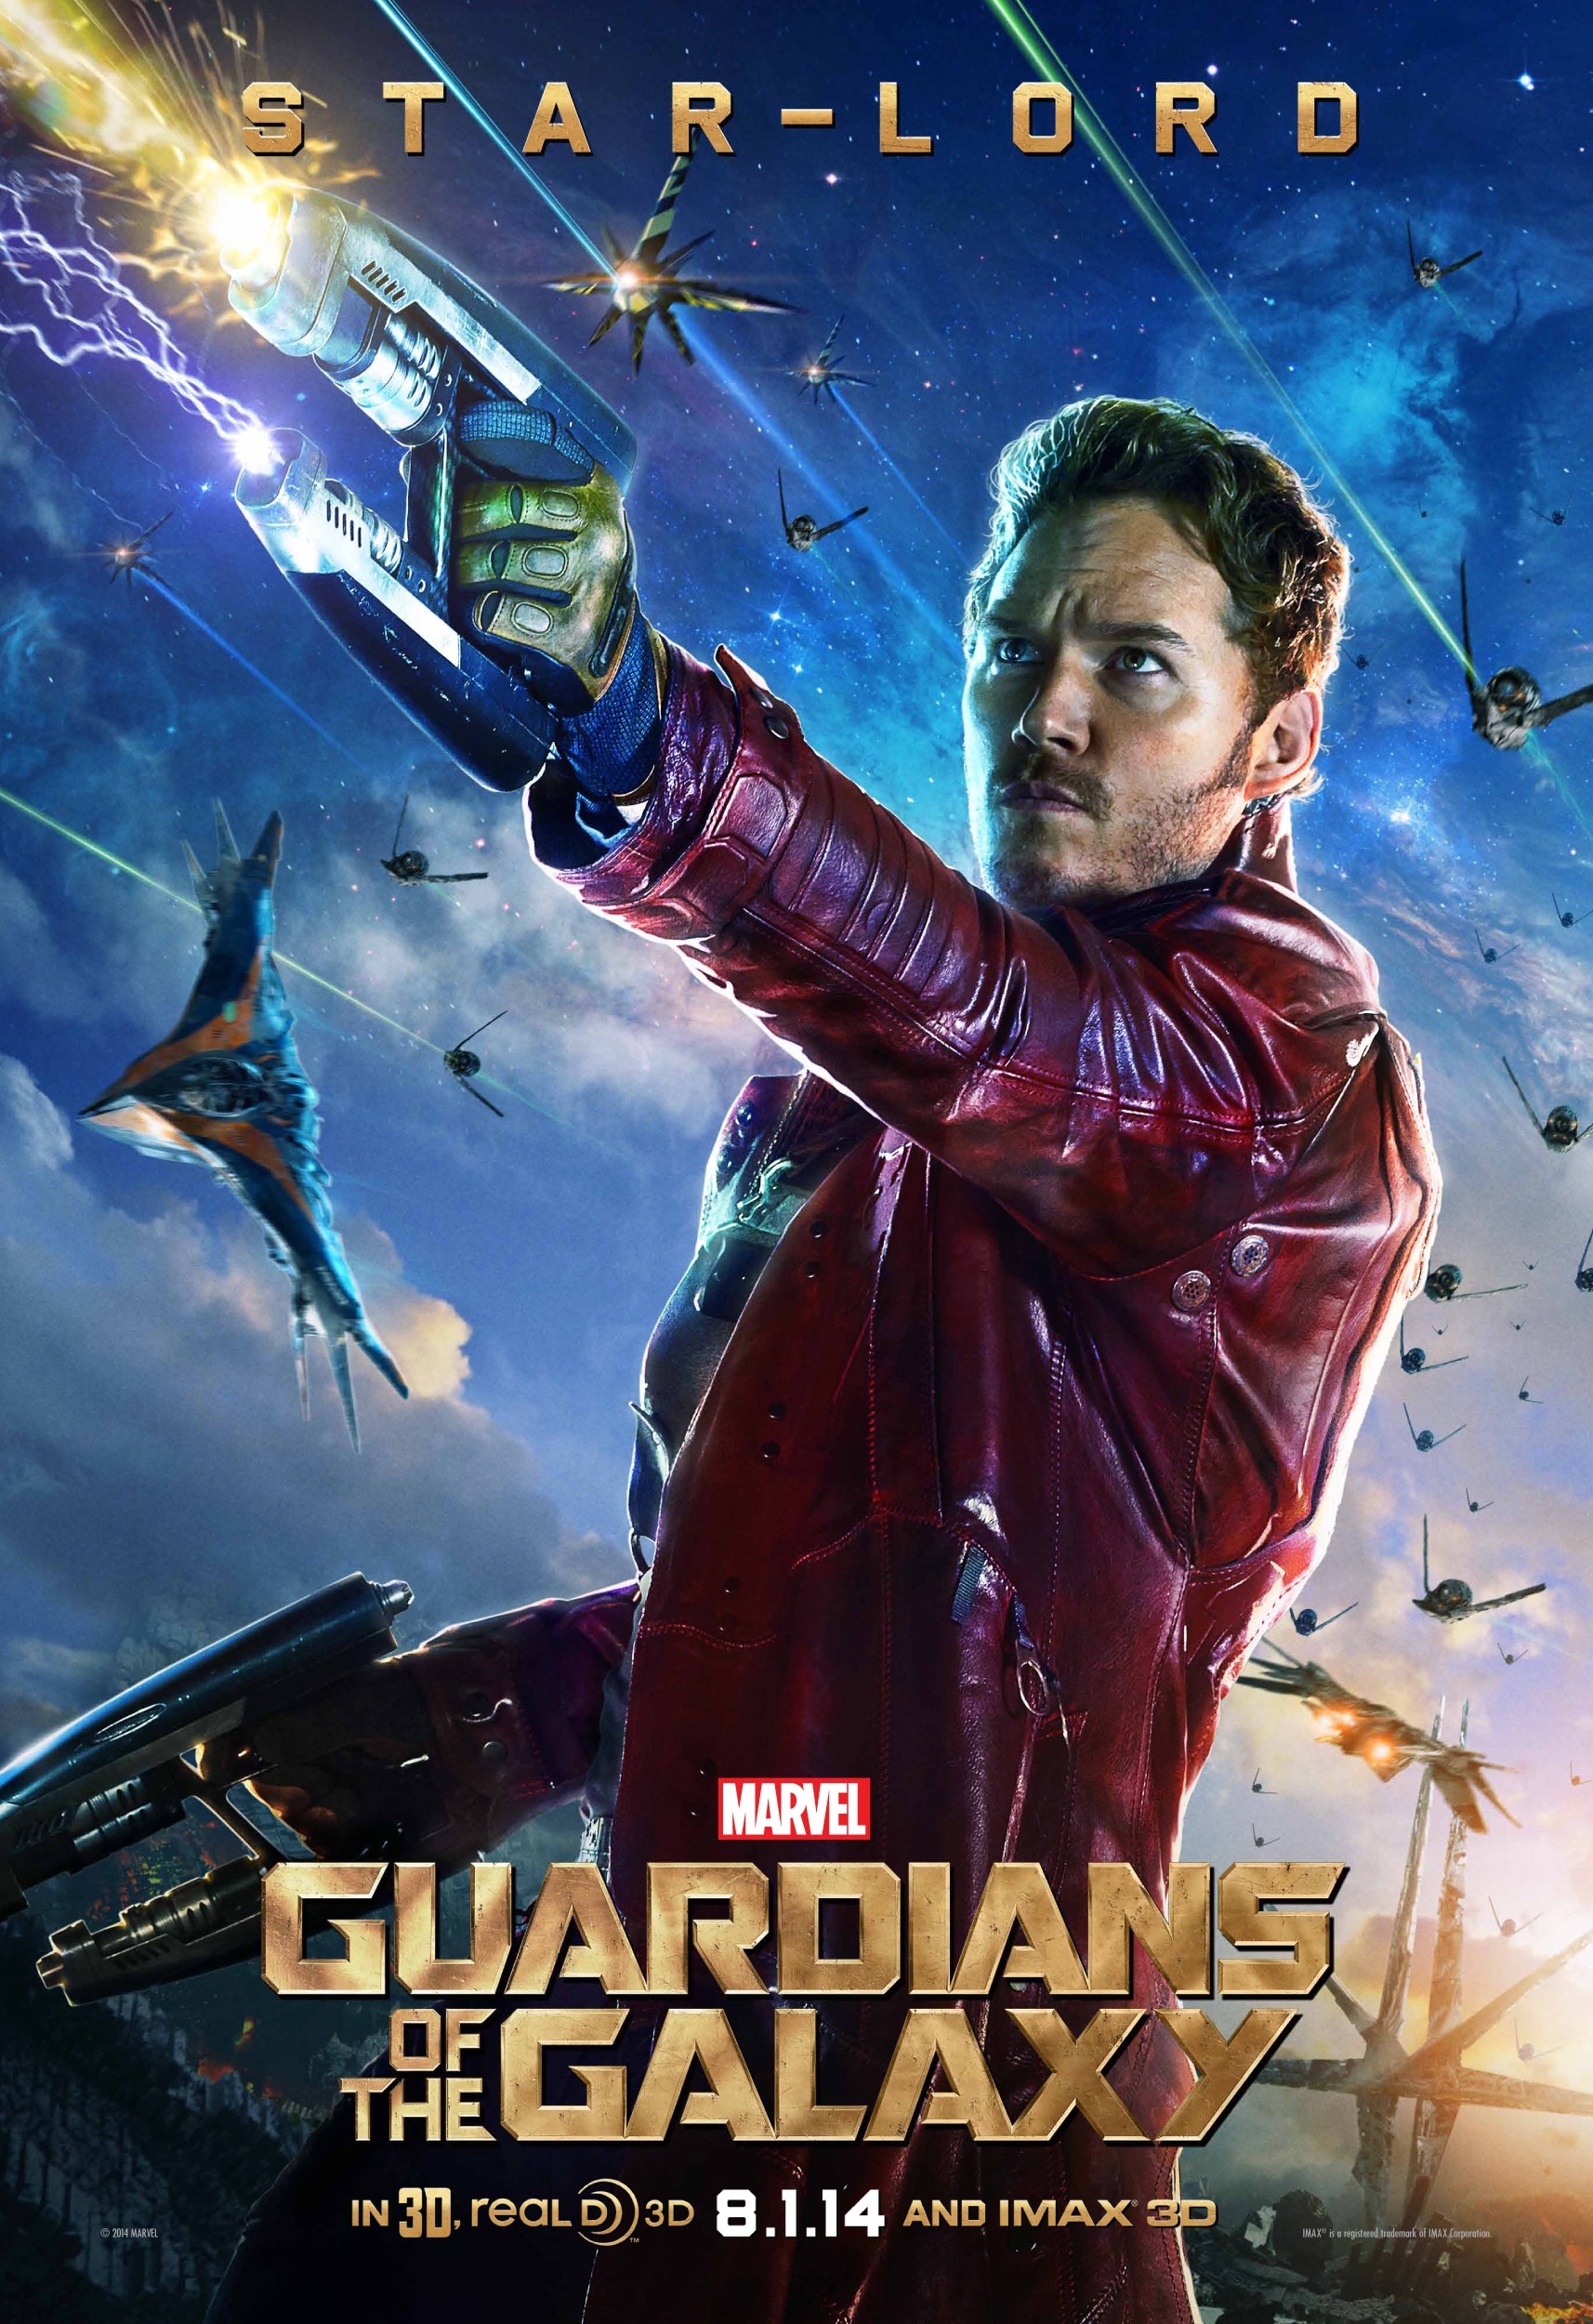 Mega Sized Movie Poster Image for Guardians of the Galaxy (#7 of 23)